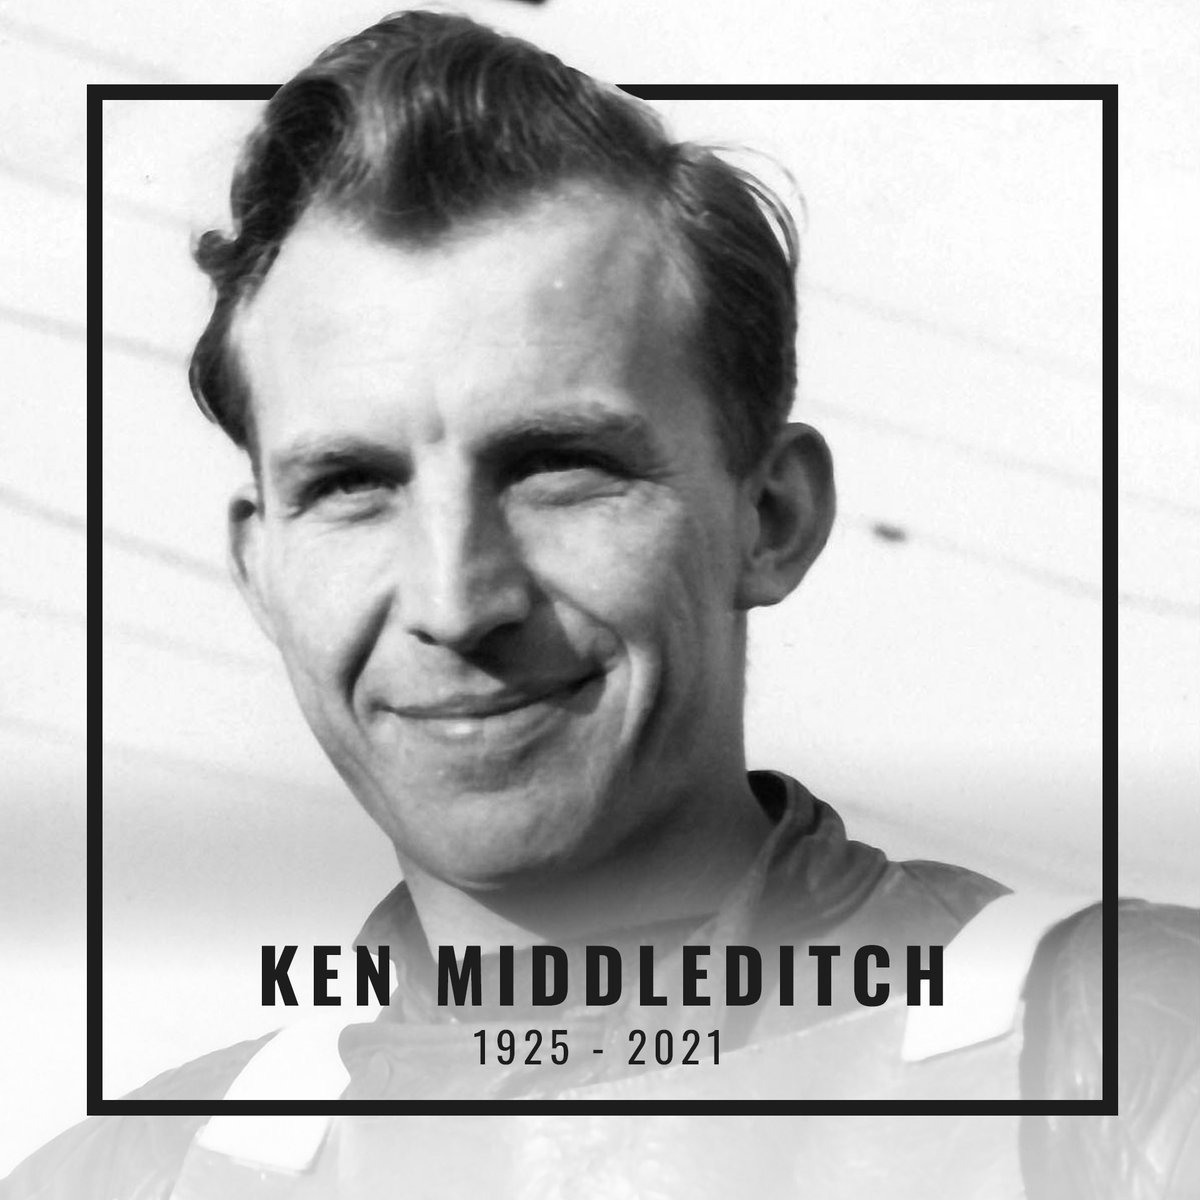 It is with deep sadness and heavy hearts that we announce the passing of Poole Speedway legend Ken Middleditch Our deepest condolences go out to Neil and the Middleditch family Rest in peace Ken